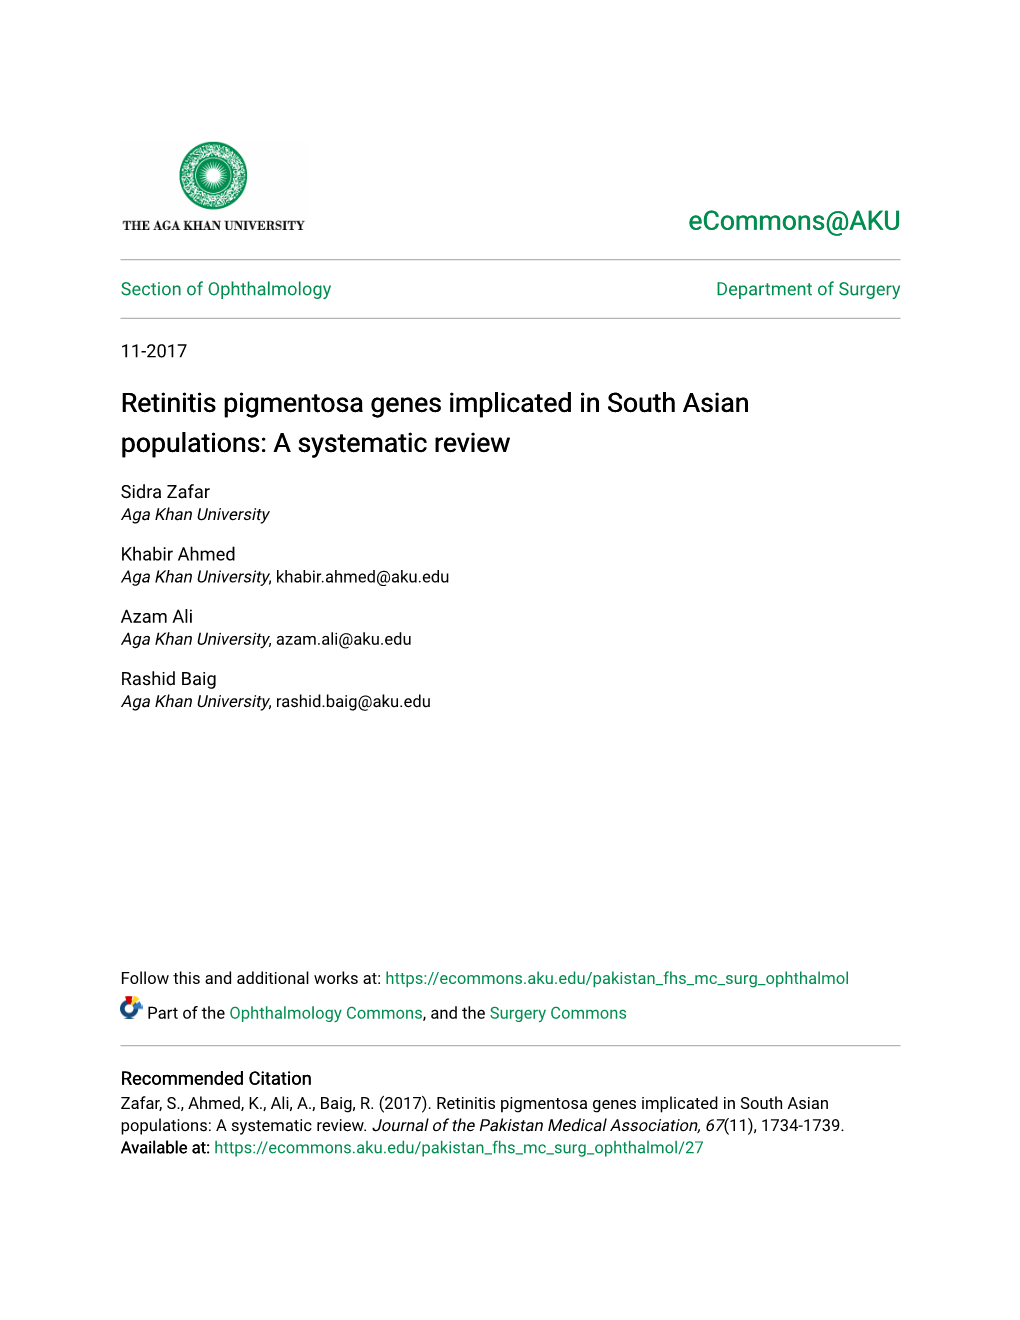 Retinitis Pigmentosa Genes Implicated in South Asian Populations: a Systematic Review